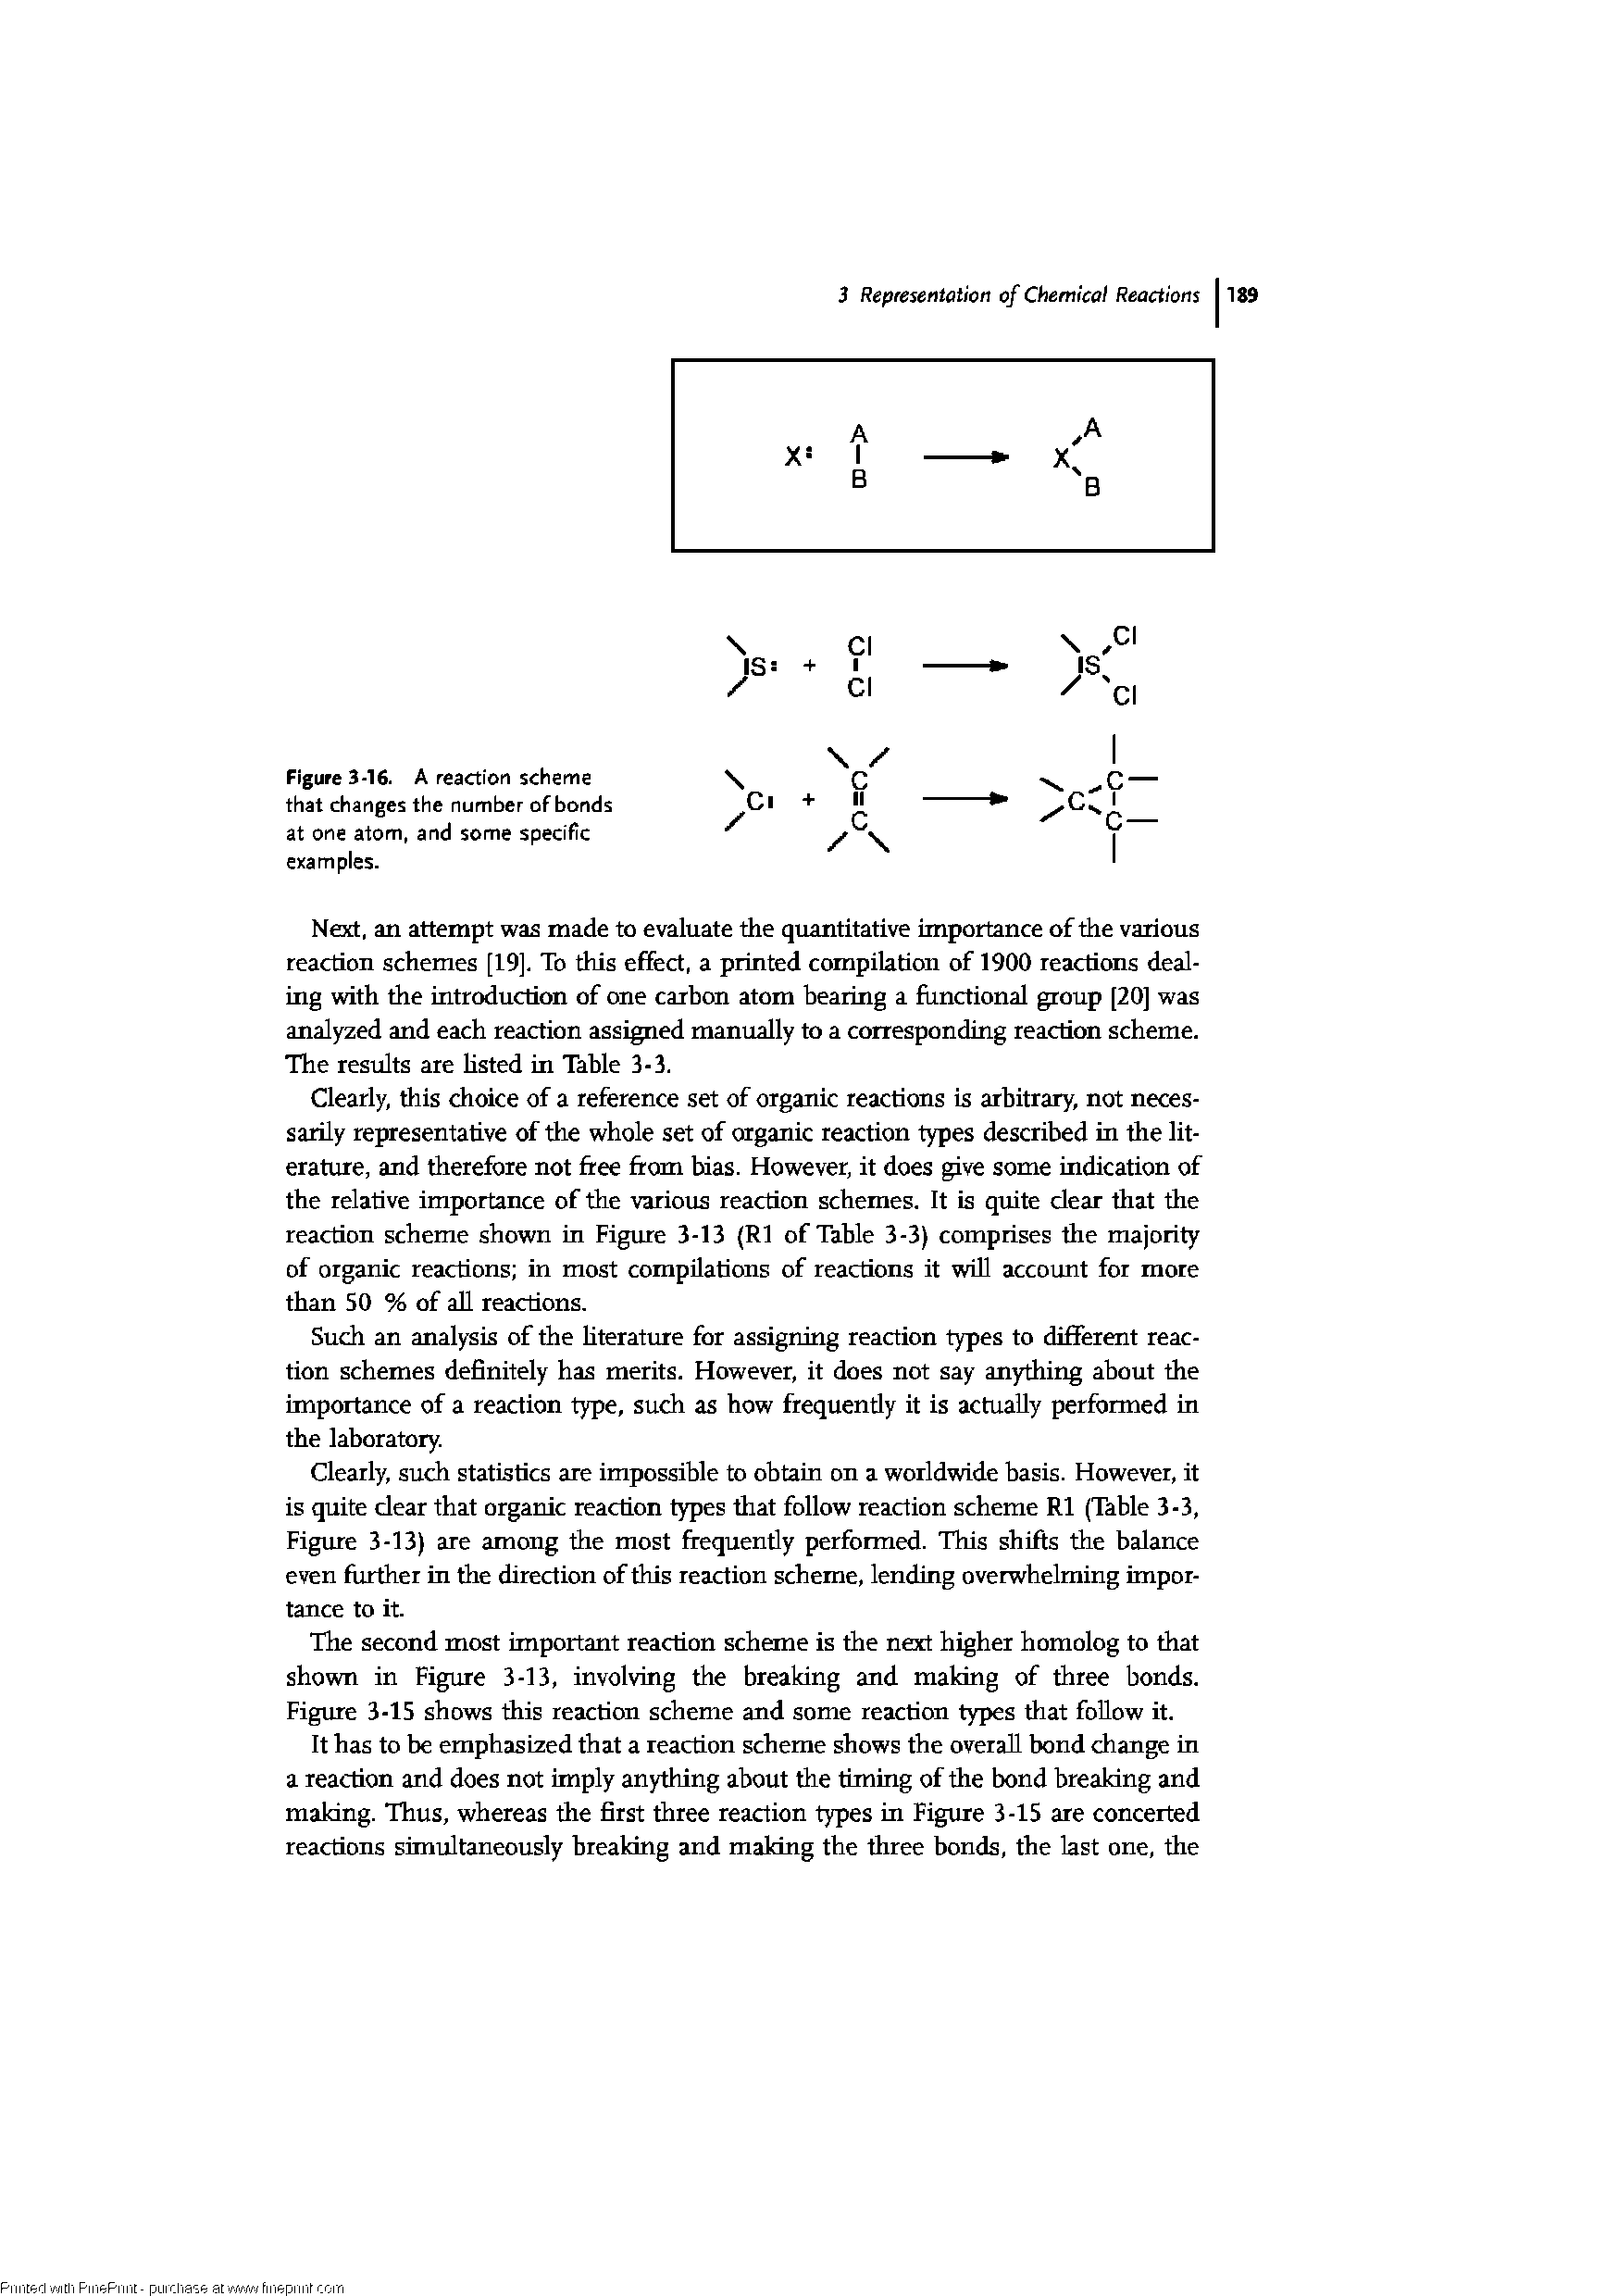 Figure 3-16. A reaction scheme that changes the number of bonds at one atom, and some specific examples.